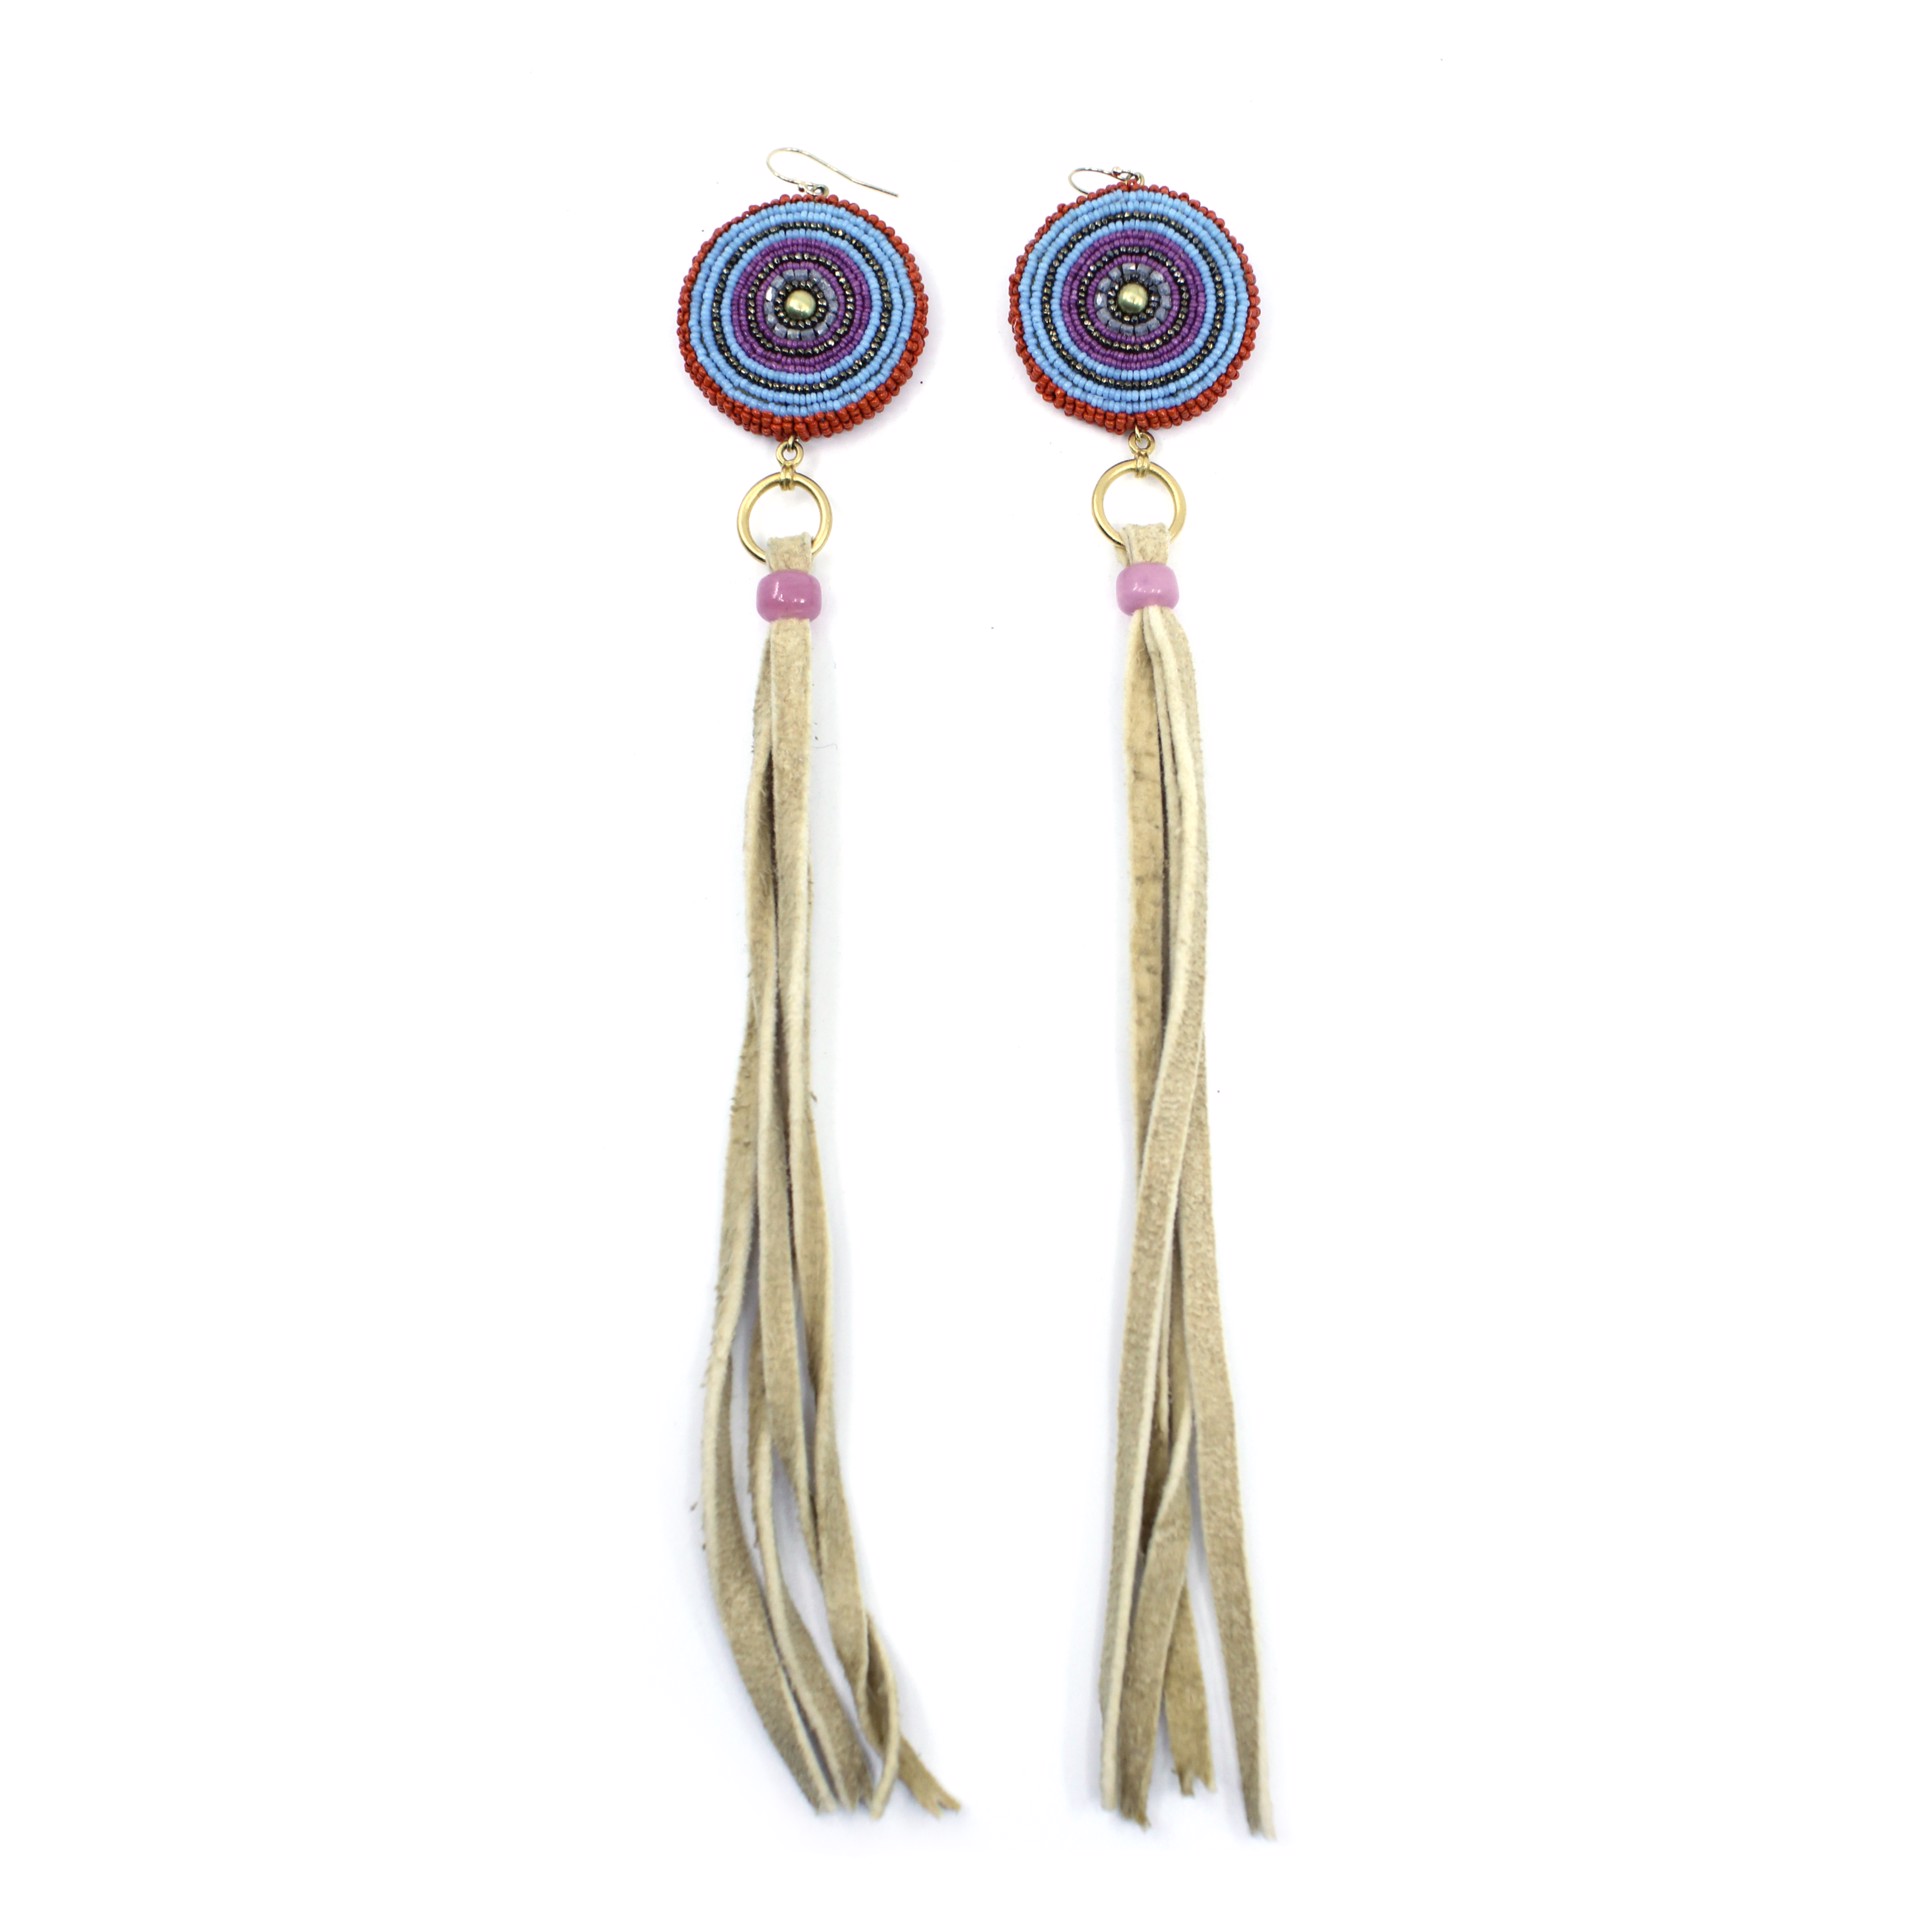 Beaded Long Earrings by Hollis Chitto